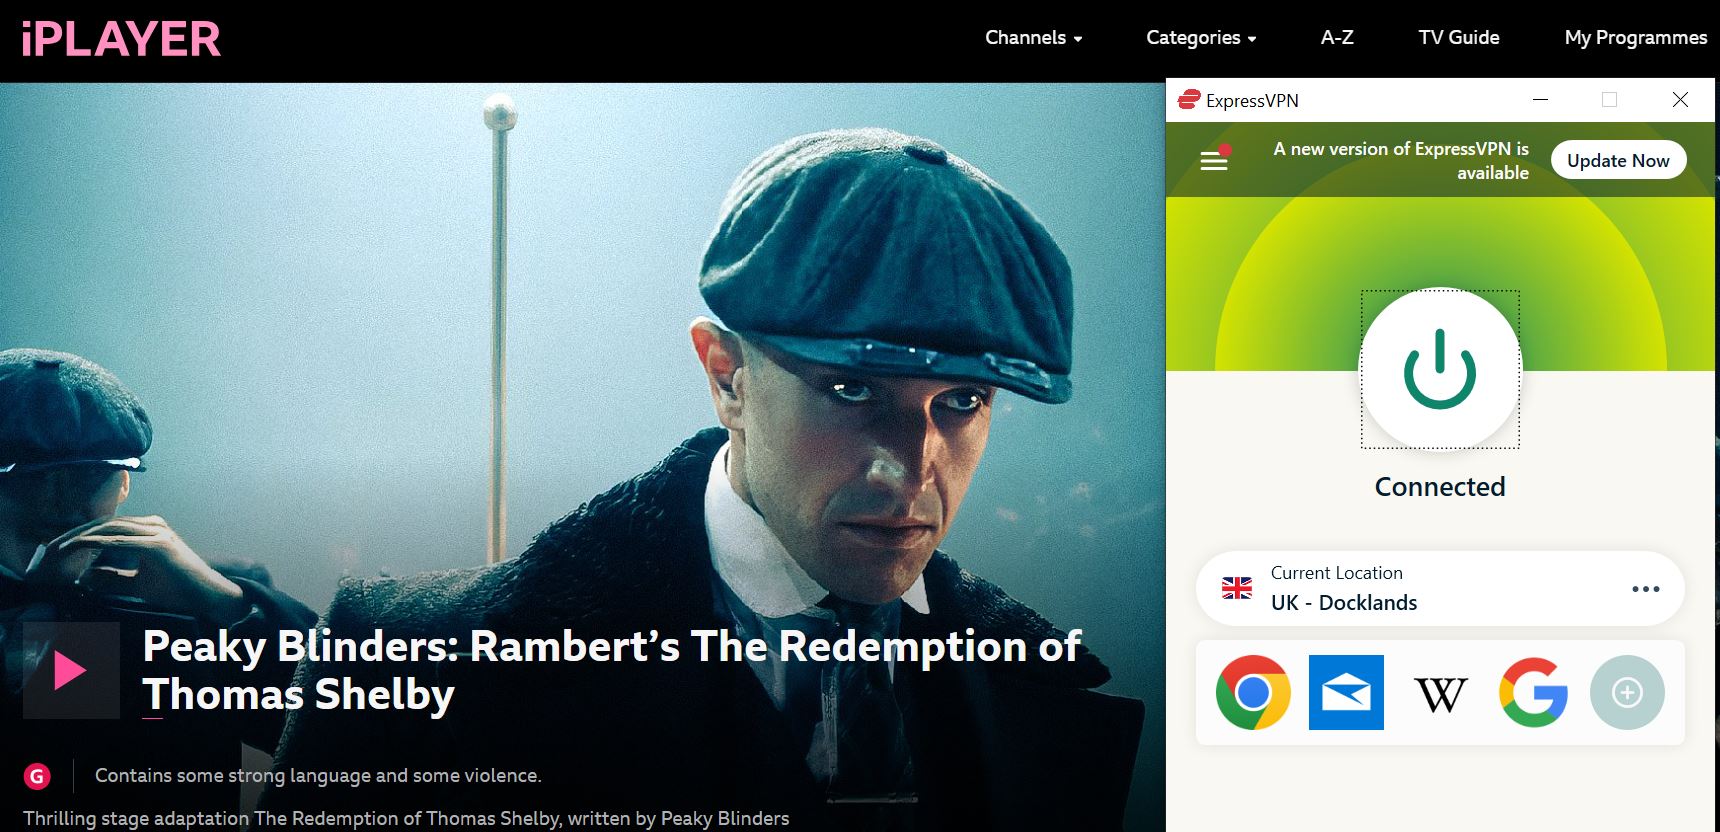 How to watch Peaky Blinders: The Redemption of Thomas Shelby